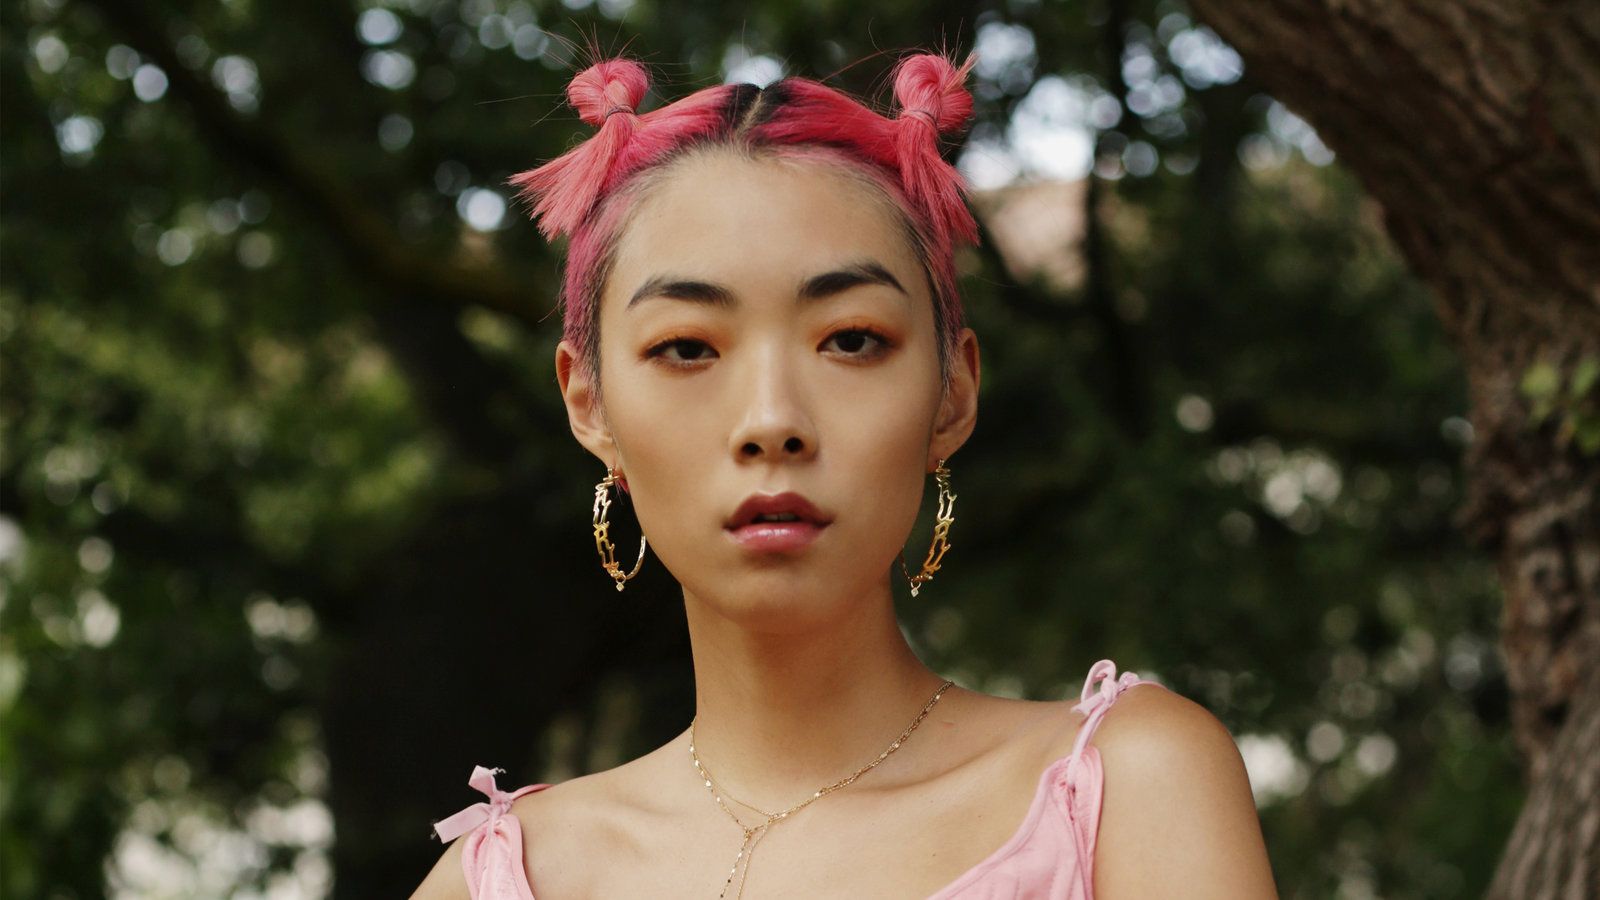 Rina Sawayama Is Not the Asian Britney Spears